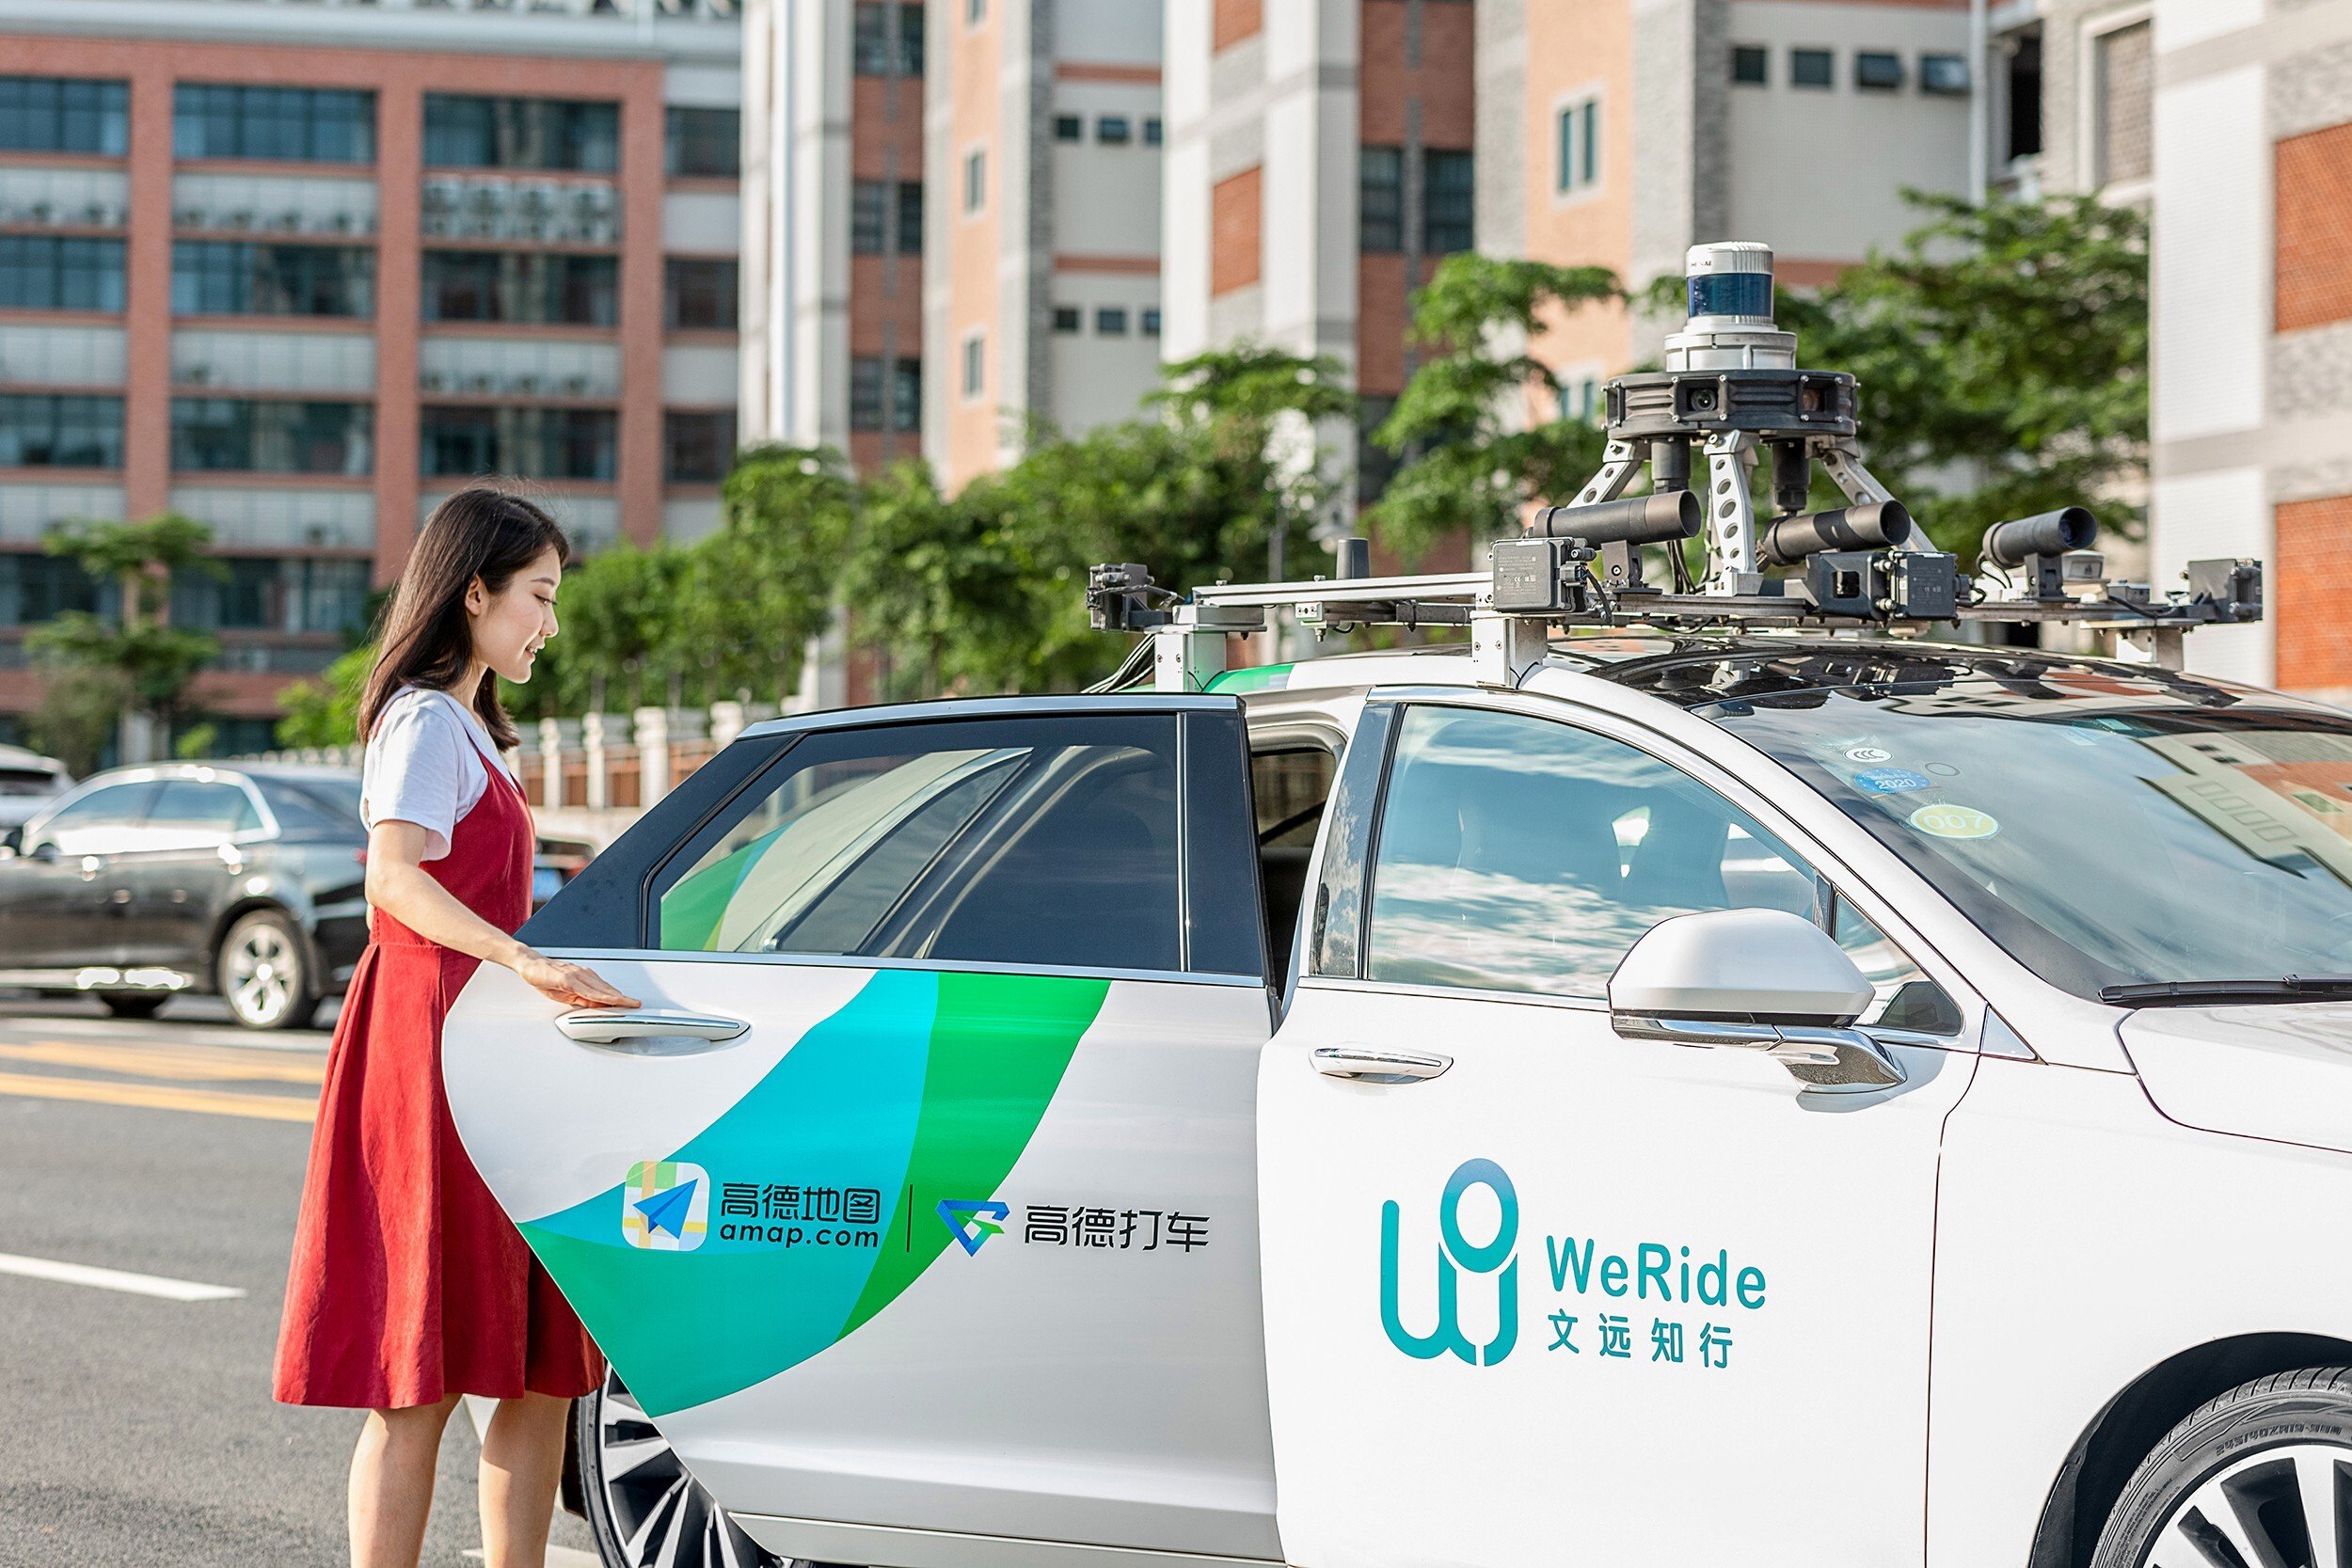 Chinese autonomous vehicle firms such as WeRide, Pony.ai, AutoX, Neolix and Didi are launching their own robotaxis and contactless grocery services in different cities in China. Photo: Handout